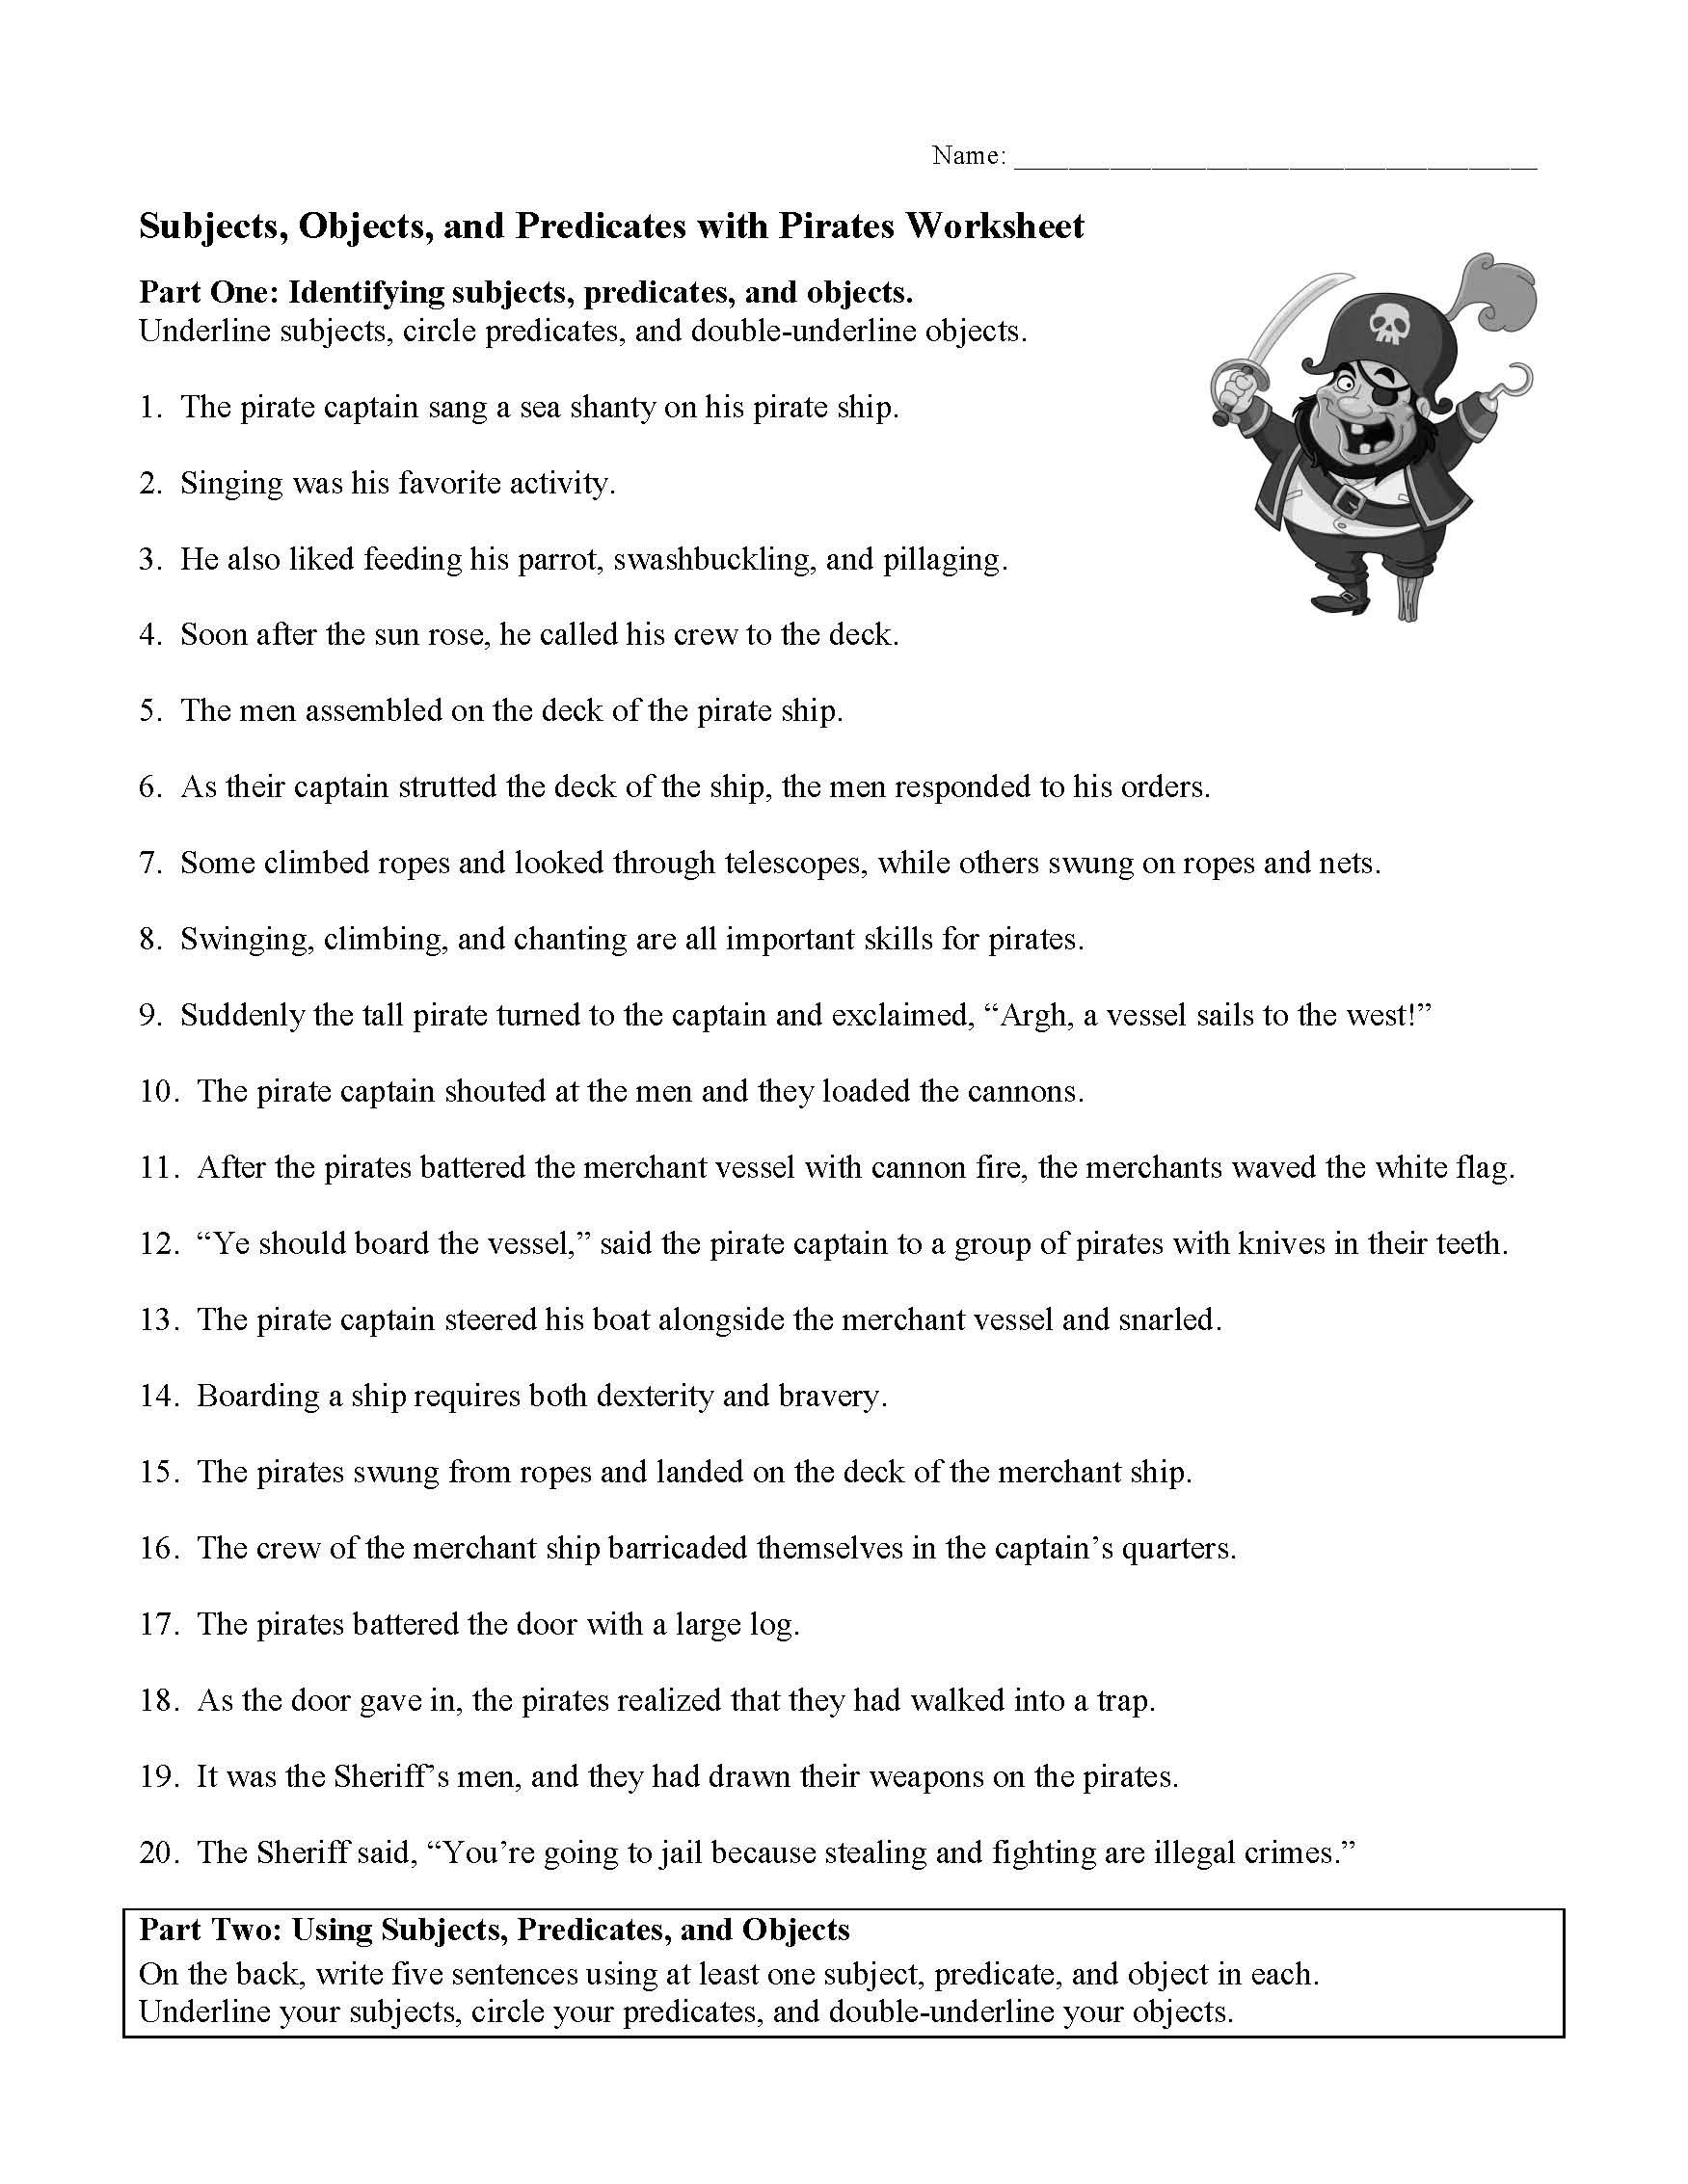 This is a preview image of Subjects, Objects, and Predicates with Pirates Worksheet. Click on it to enlarge it or view the source file.